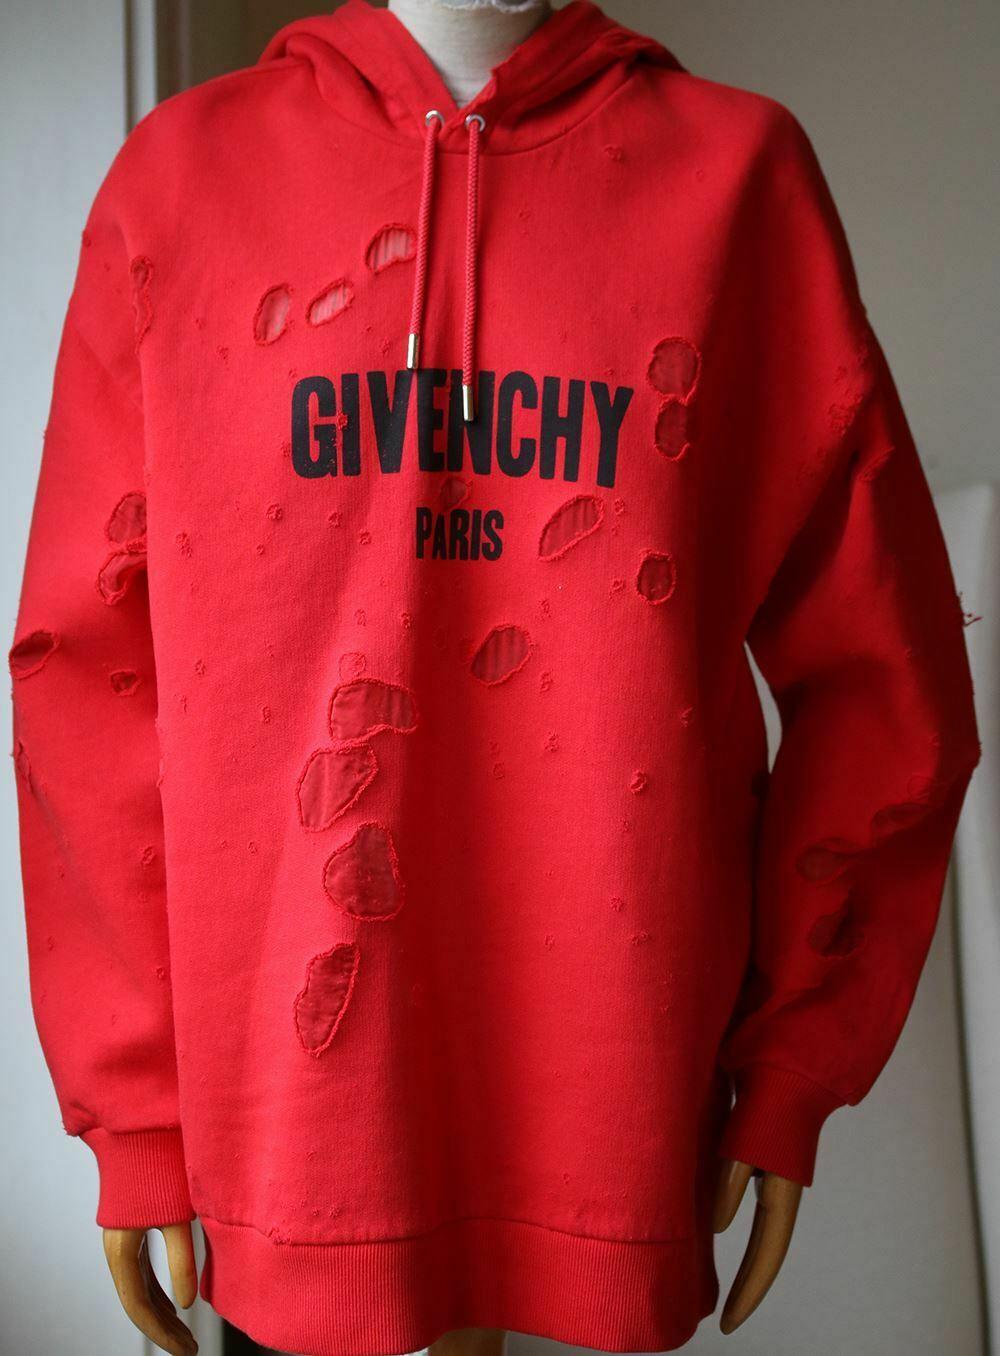 Riccardo Tisci's for Givenchy collection is divided into three categories, one being an urban lineup filled with oversized shapes and logos. This hooded sweatshirt is cut from red cotton-jersey and detailed with distressed cutouts backed in sheer